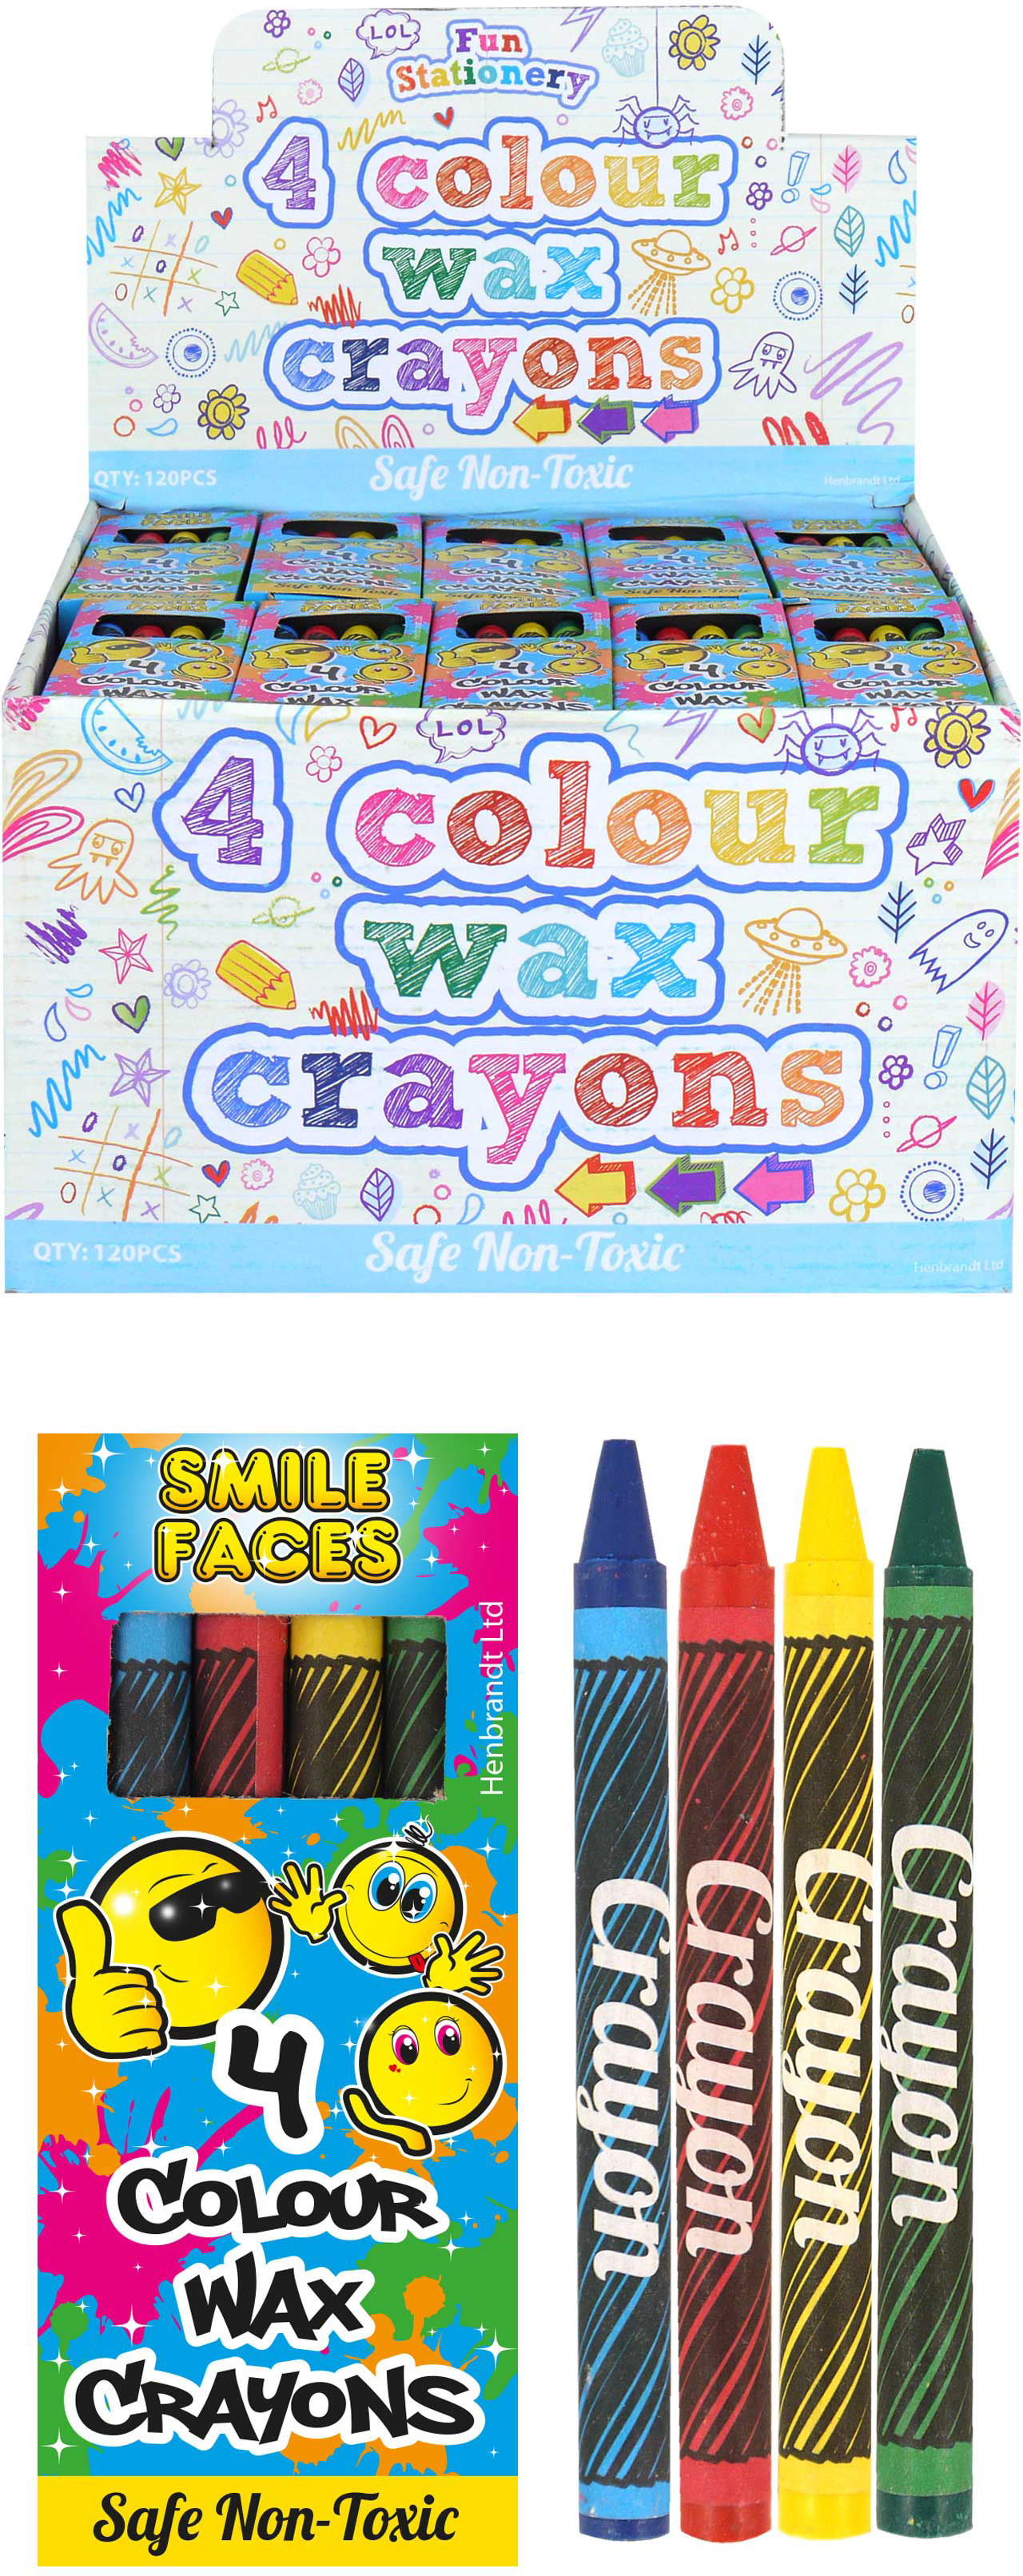 ROOST Crayon wax Smile 4 PC Box S51 206 8c, 4 ass.